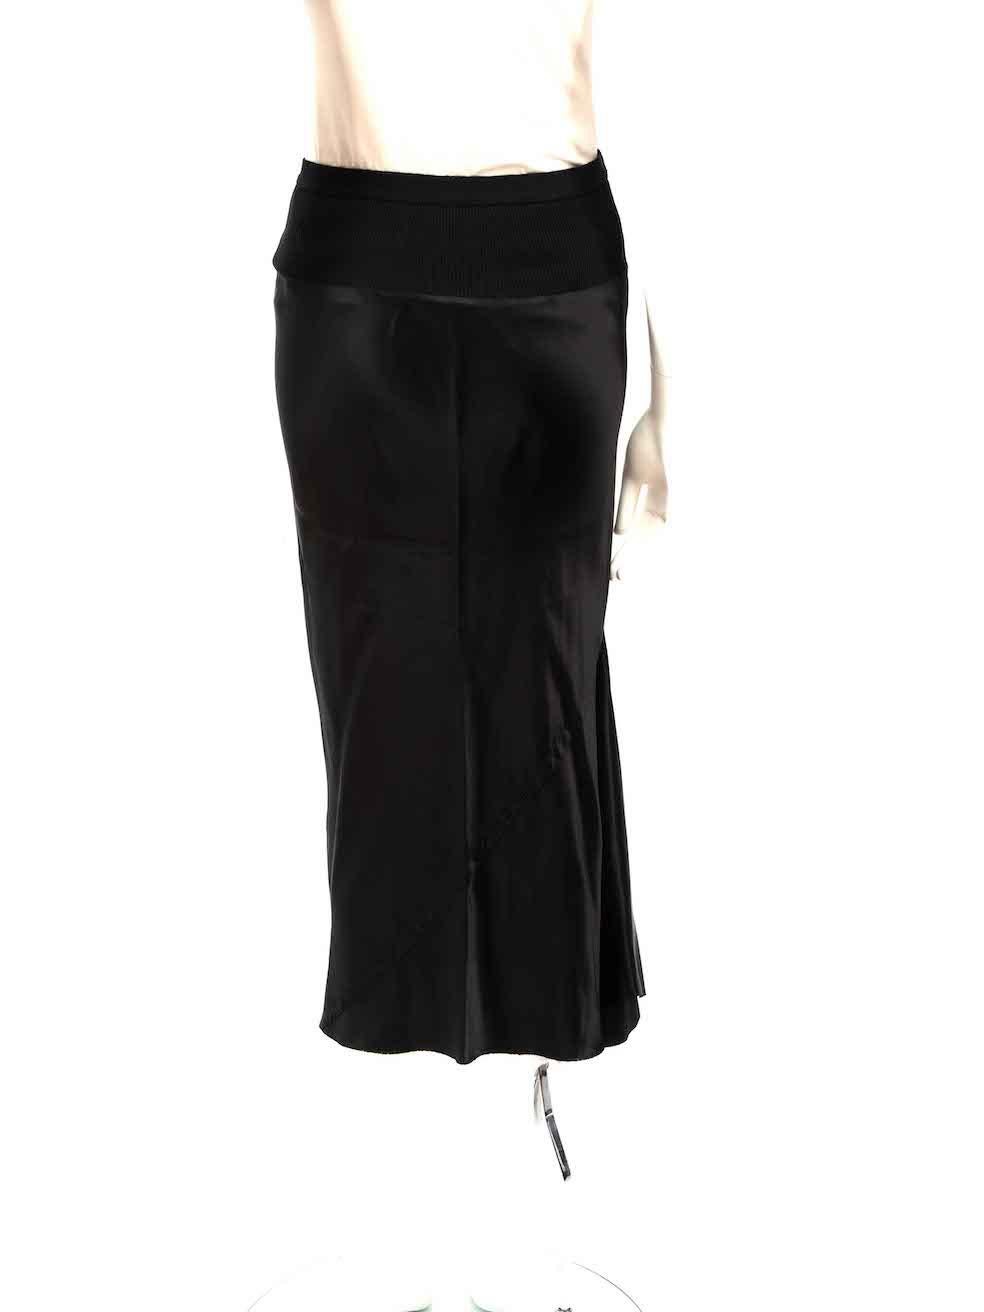 Rick Owens Sisyphus F/W 18 Black Satin Midi Skirt Size M In Good Condition For Sale In London, GB